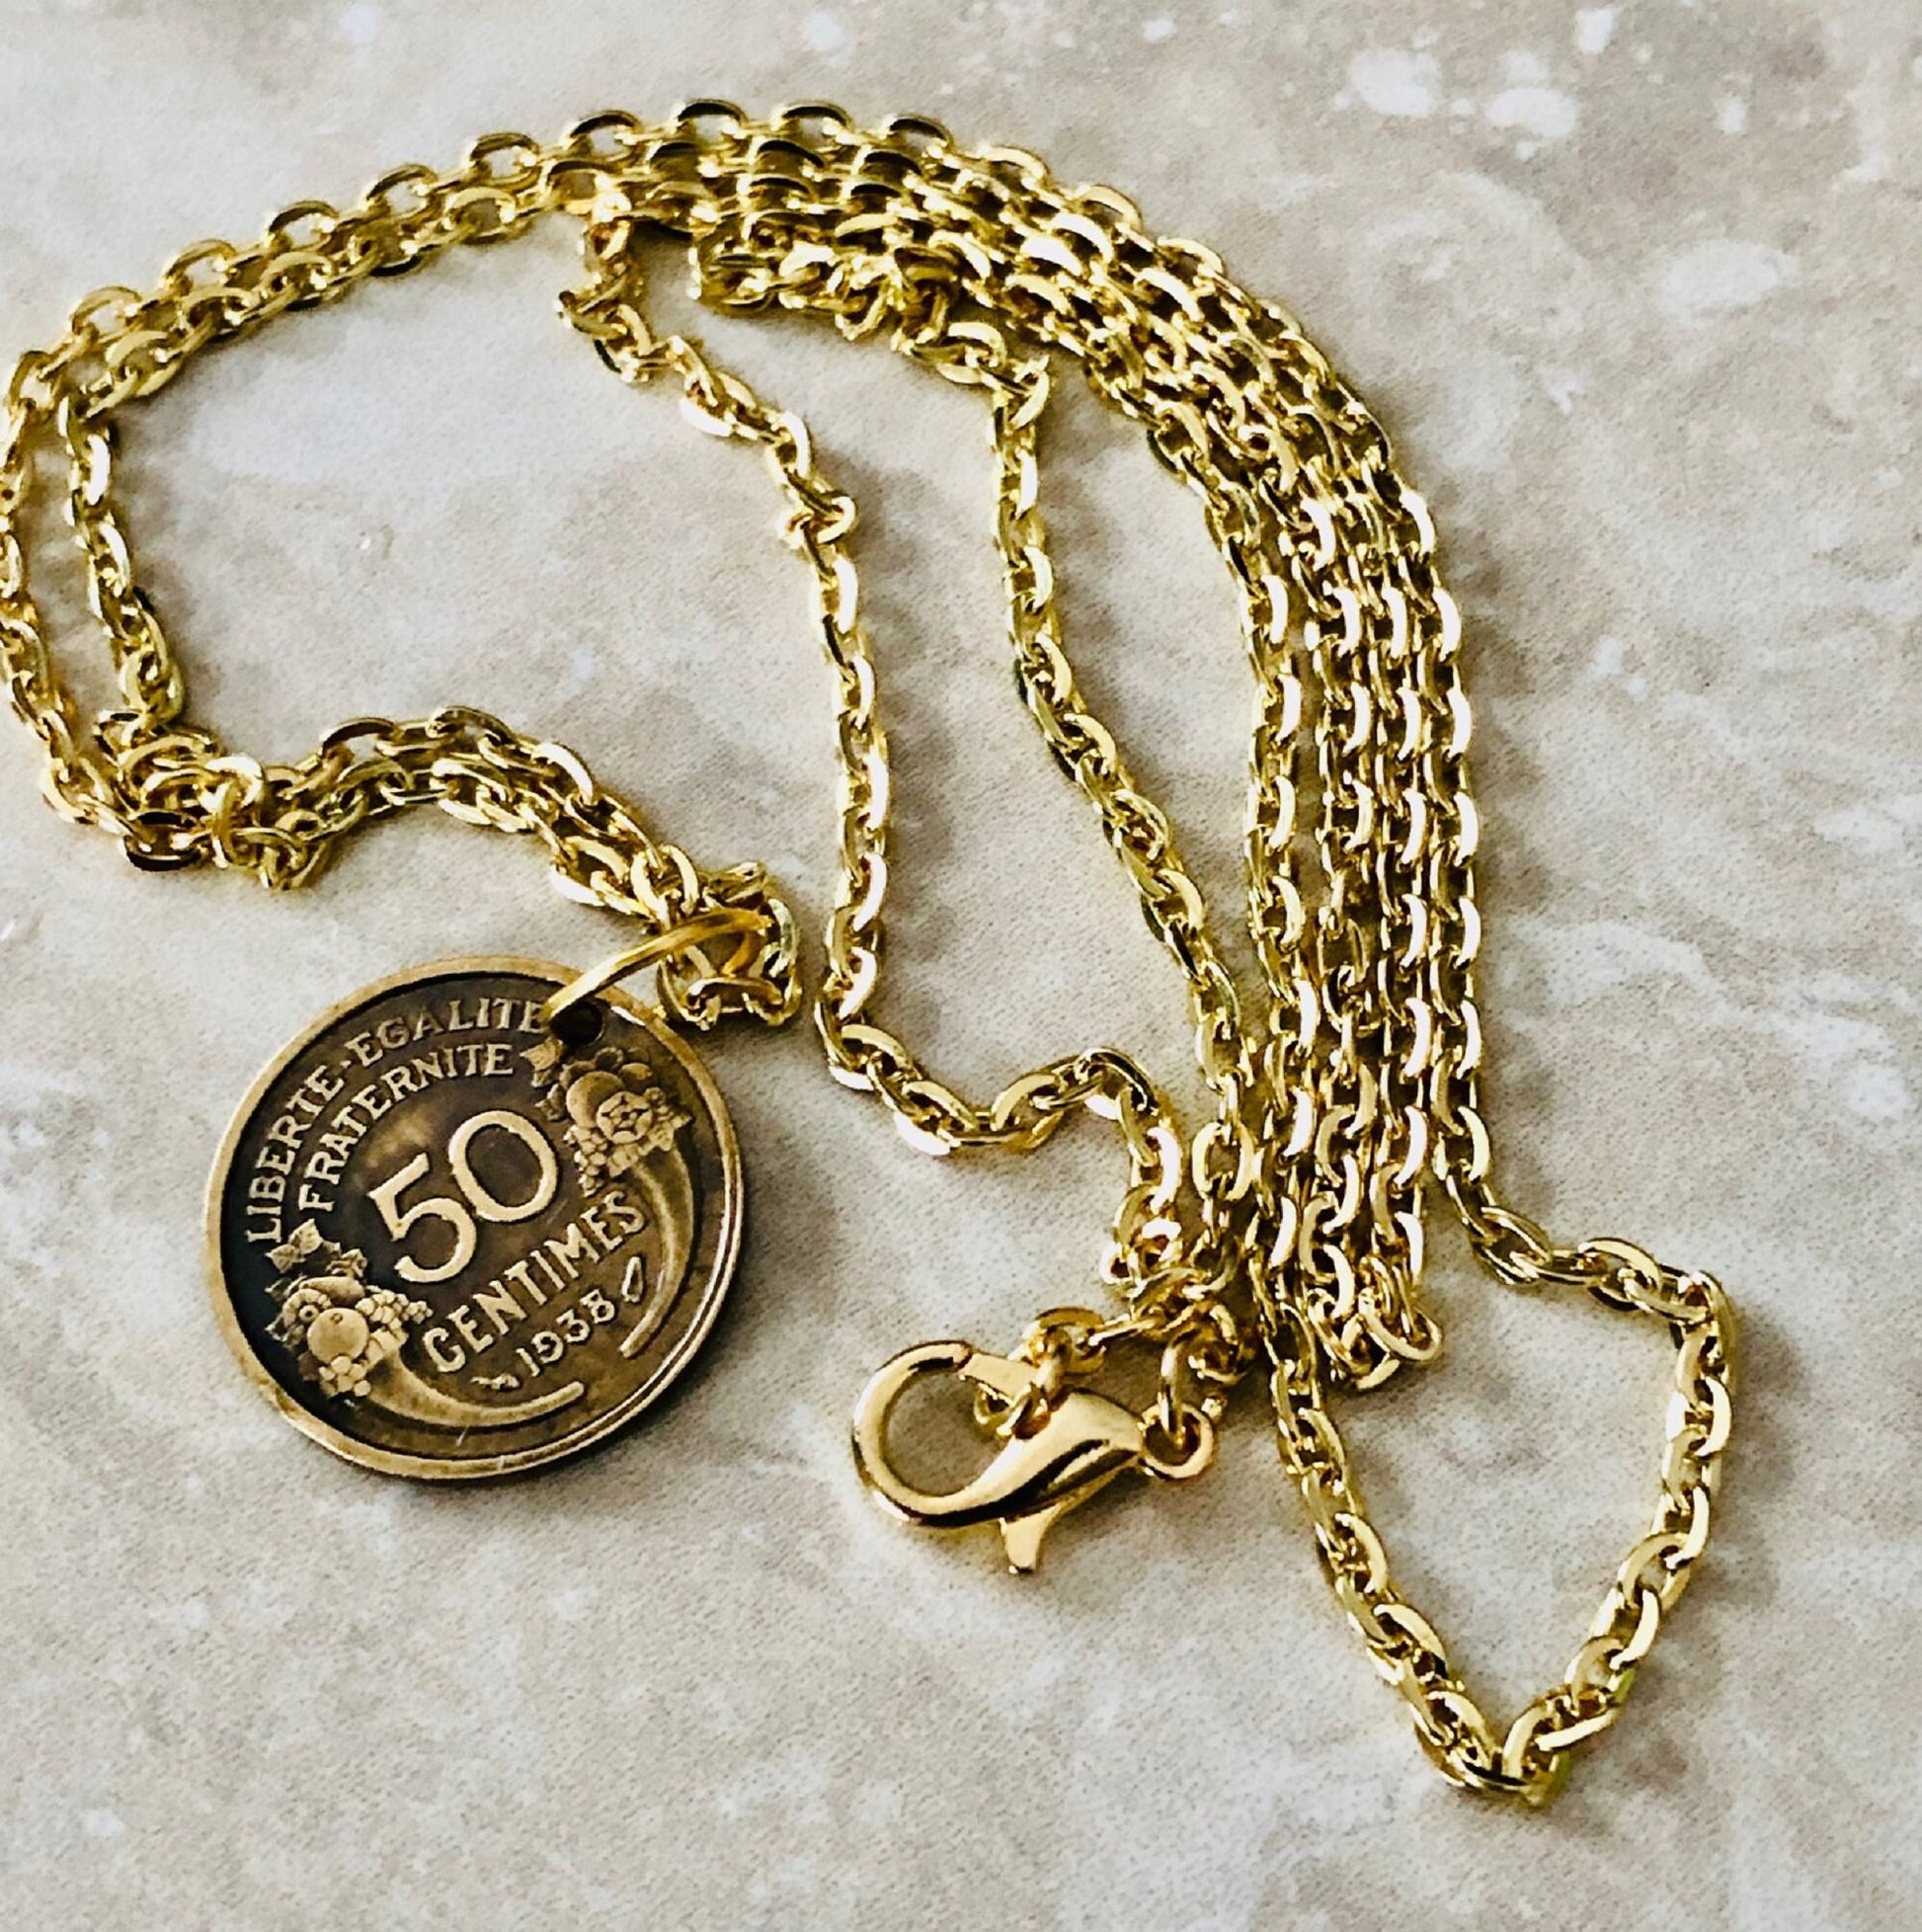 France Coin Necklace French Pendant 50 Centimes Liberty Equality Fraternity Personal Jewelry Gift Friend Charm Him Her World Coin Collector